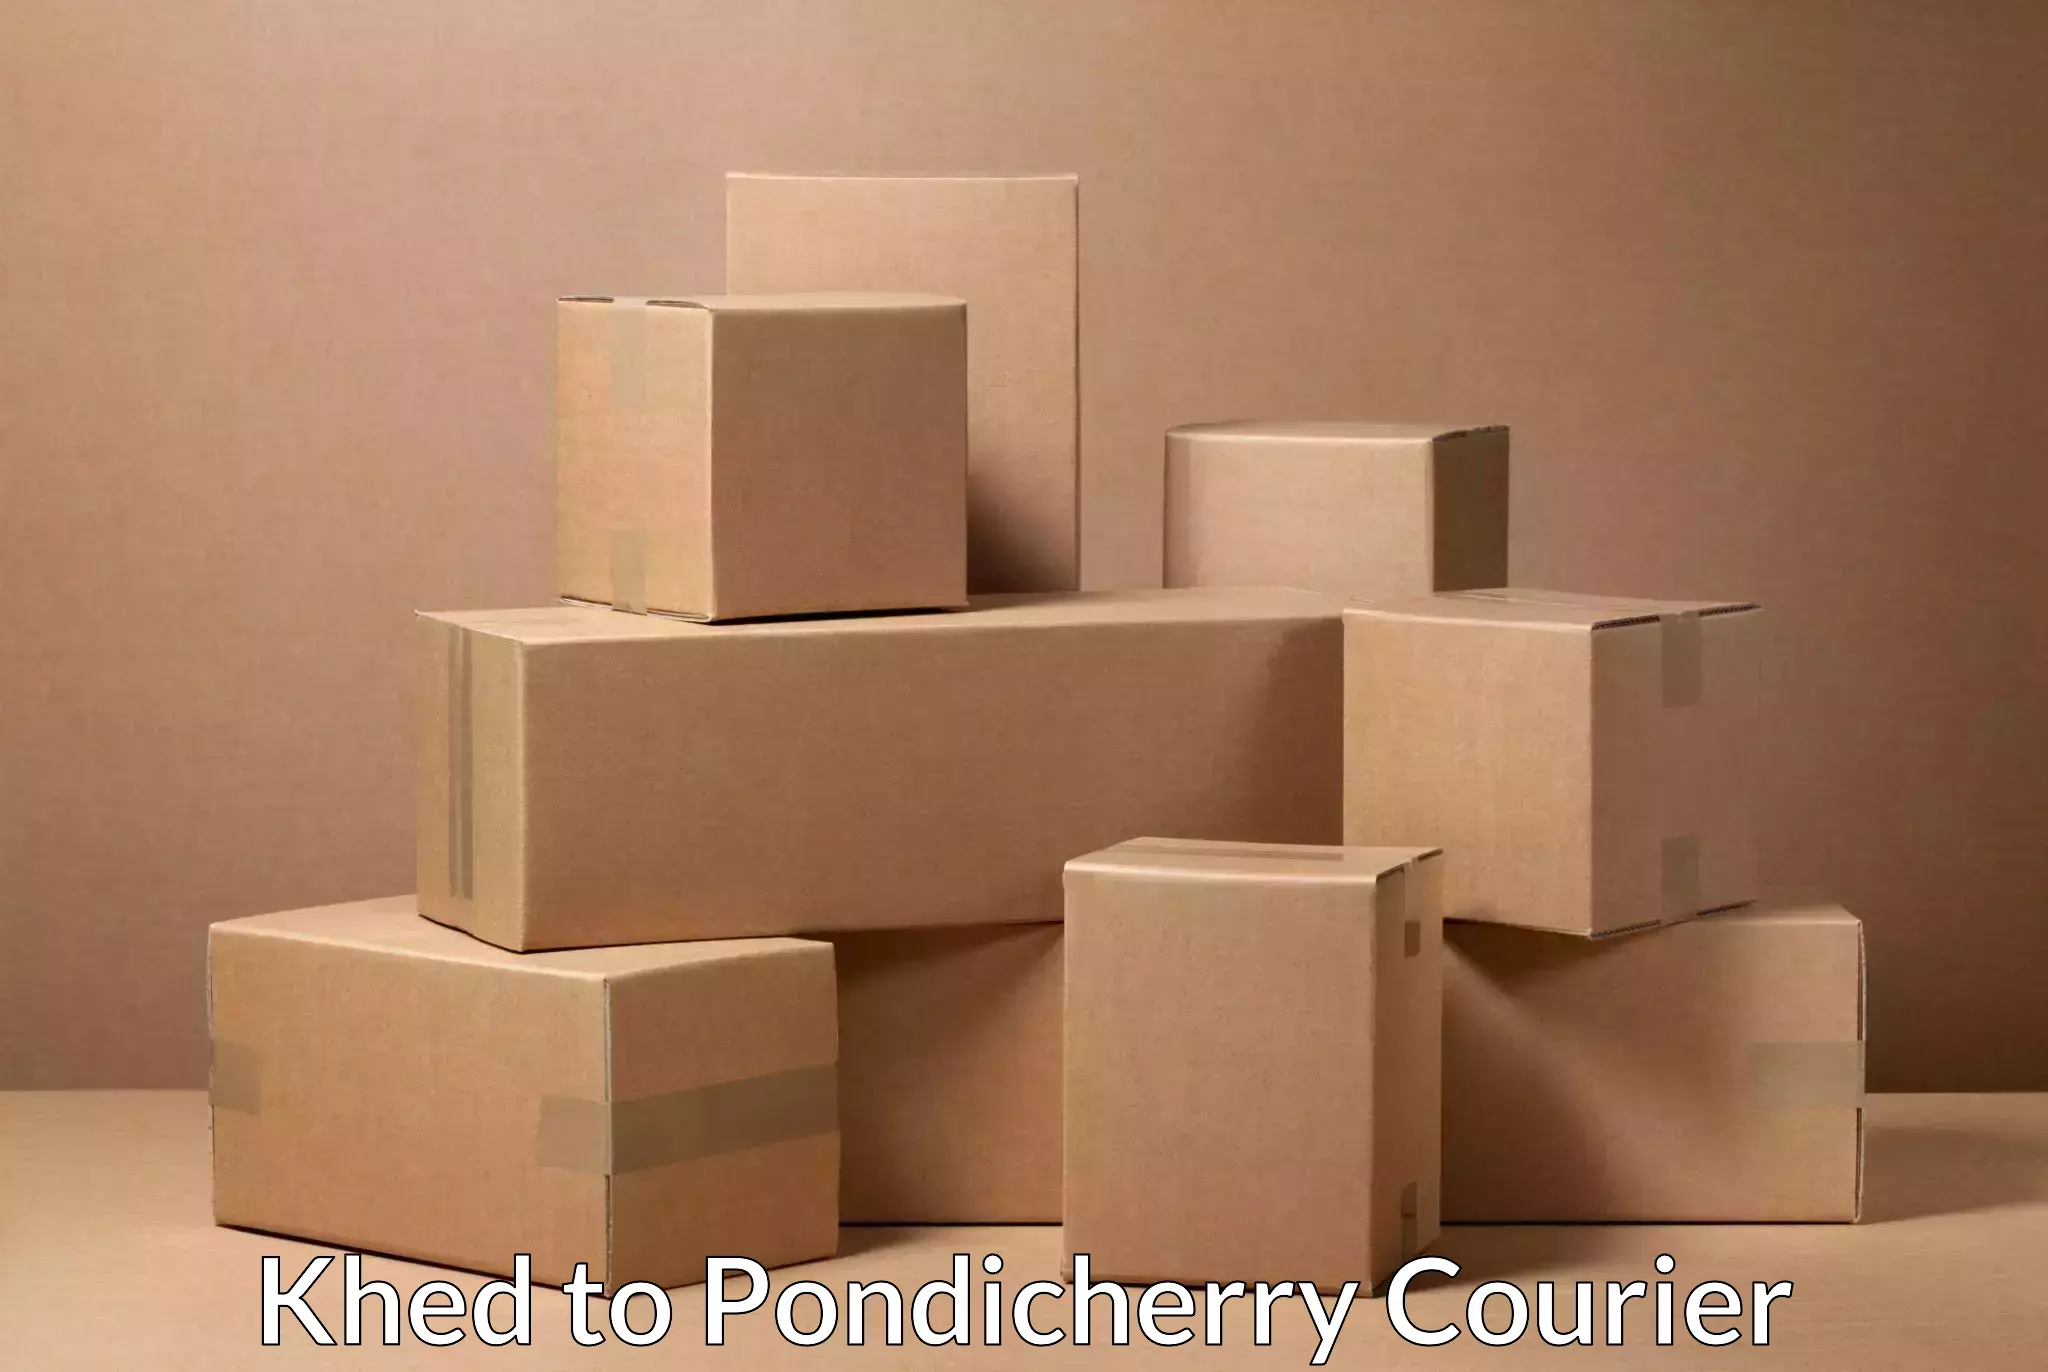 Logistics service provider in Khed to Pondicherry